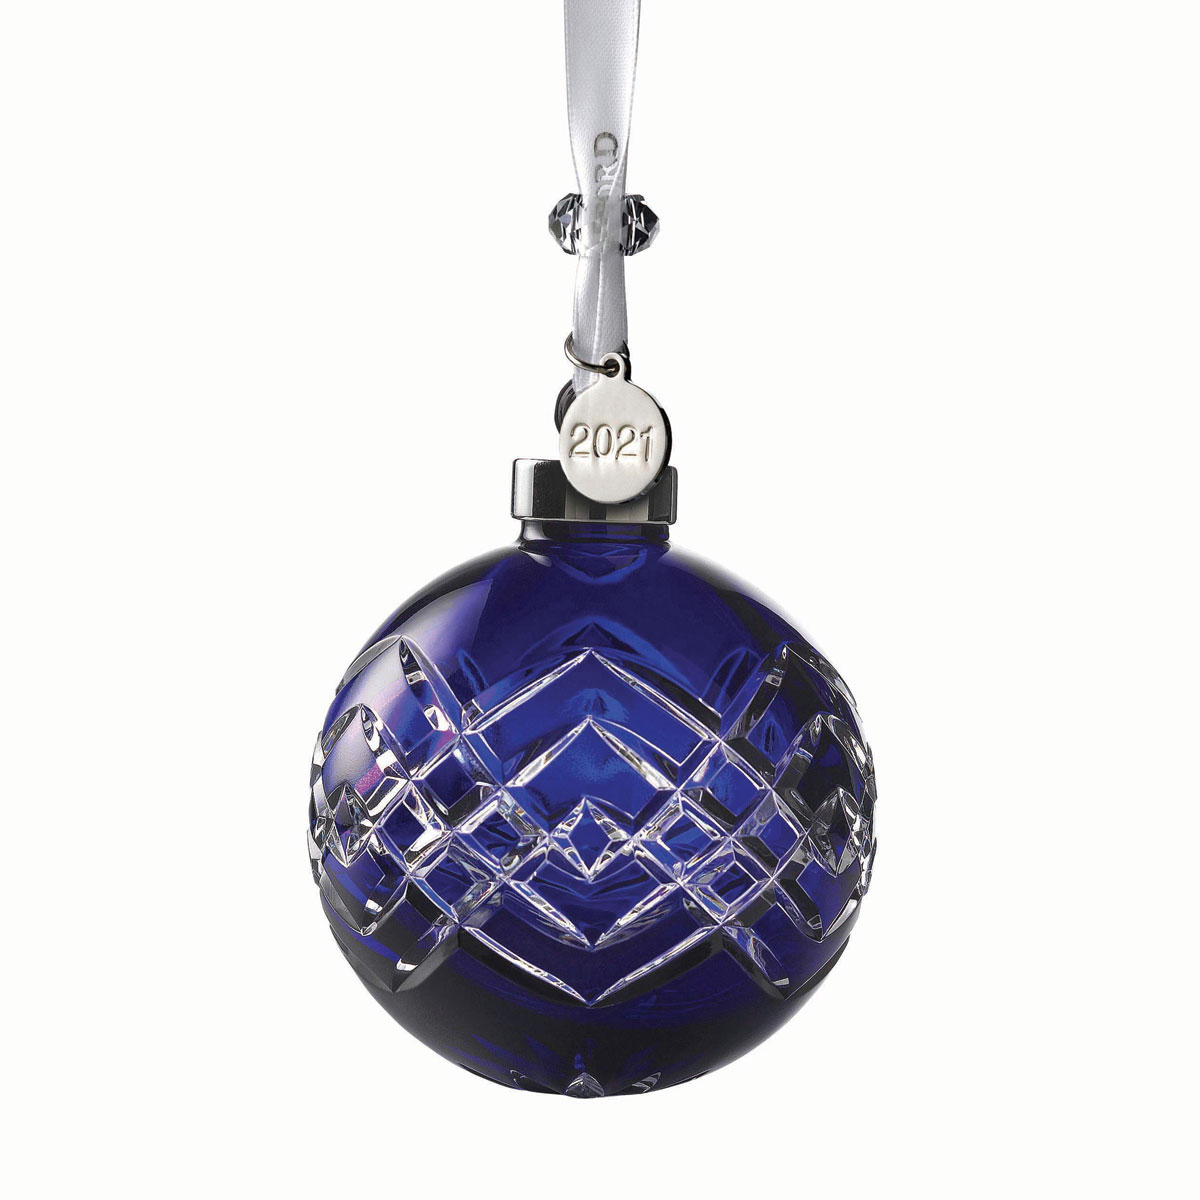 Waterford Cased Sapphire Ball 2021 Dated Ornament